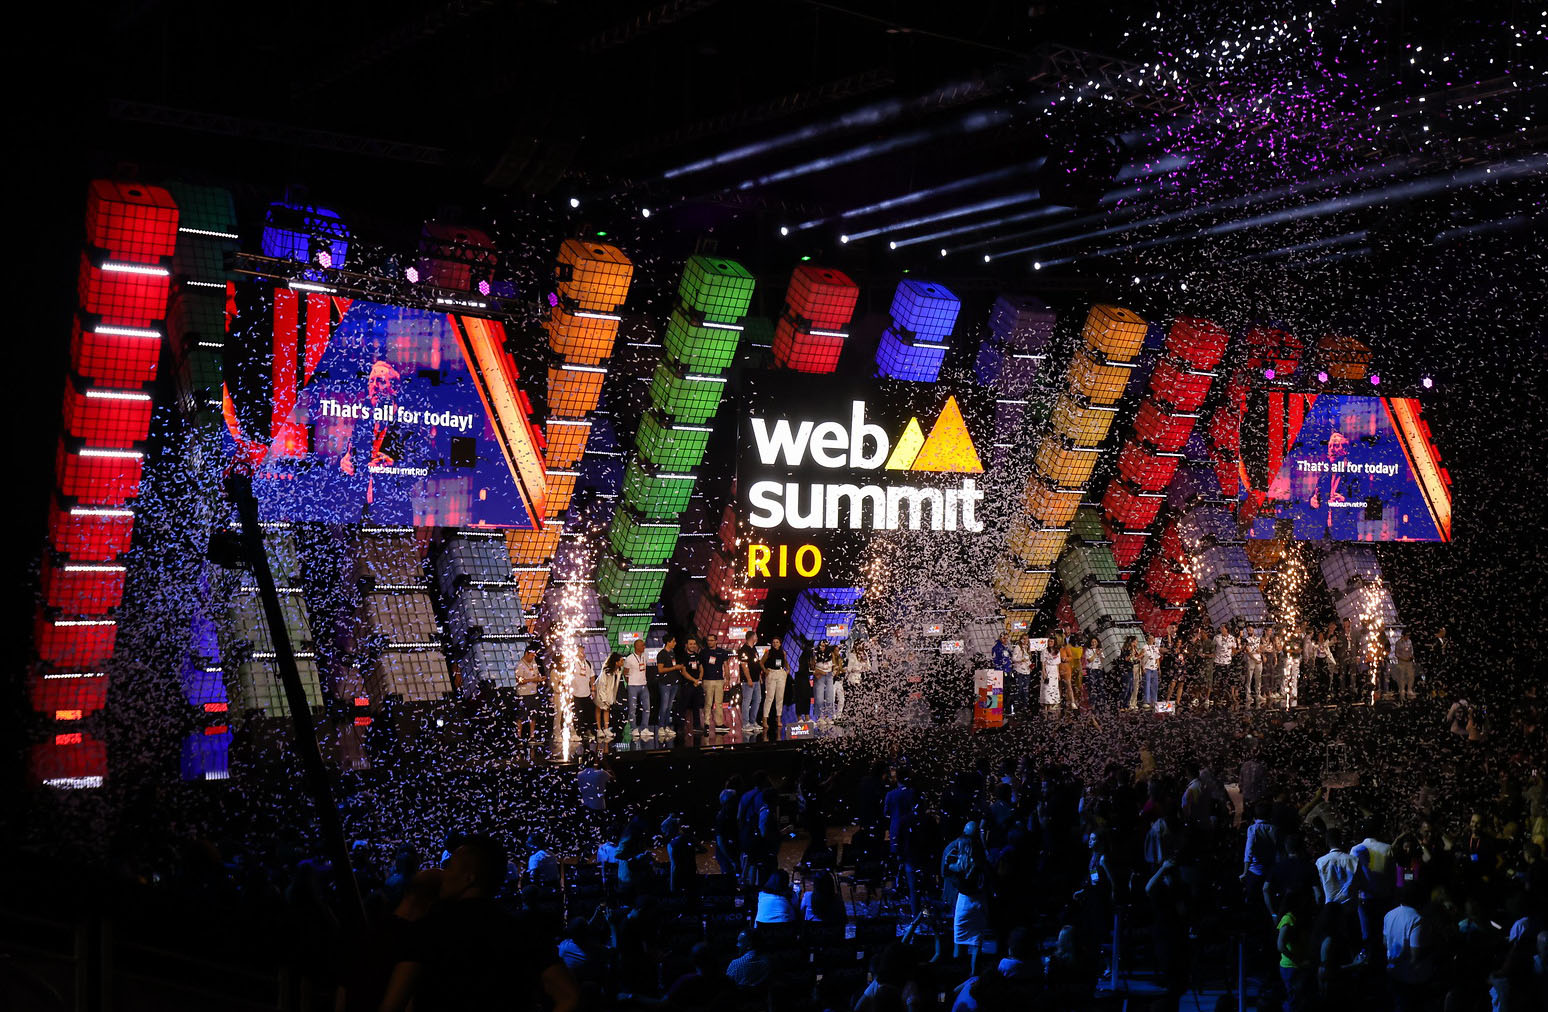 A large stage viewed over the silhouetted heads of a packed audience. A line of people stands on the stage, facing towards the audience. Confetti fills the air. A large Web Summit Rio logo hangs in the center of the stage. Two screens on either side of the logo read 'That's all for today!'